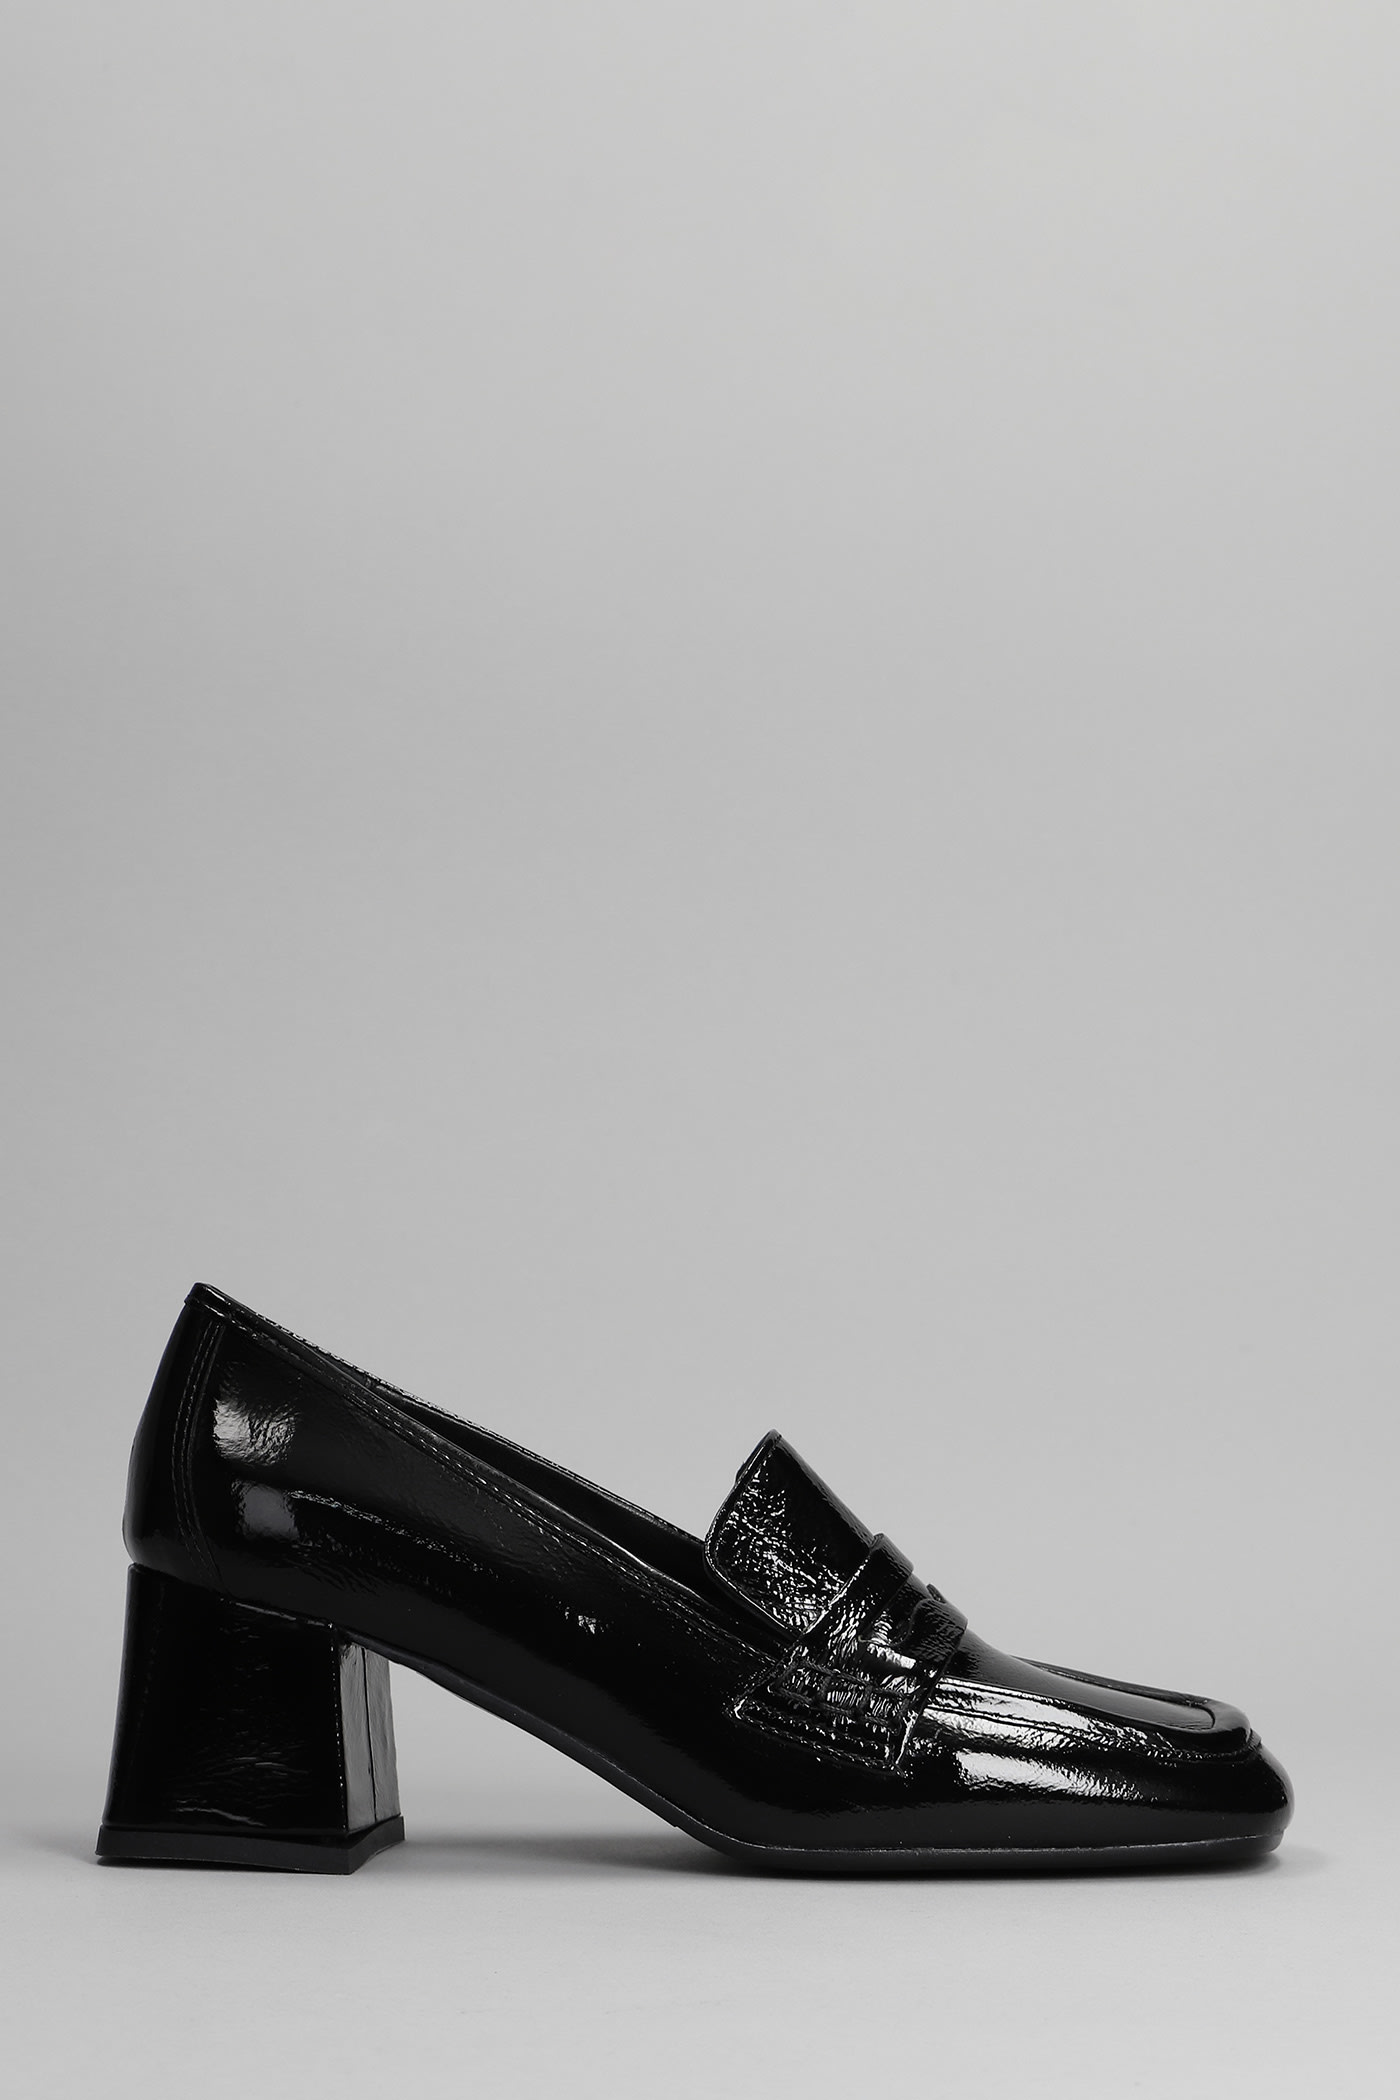 Julie Dee Pumps In Black Patent Leather